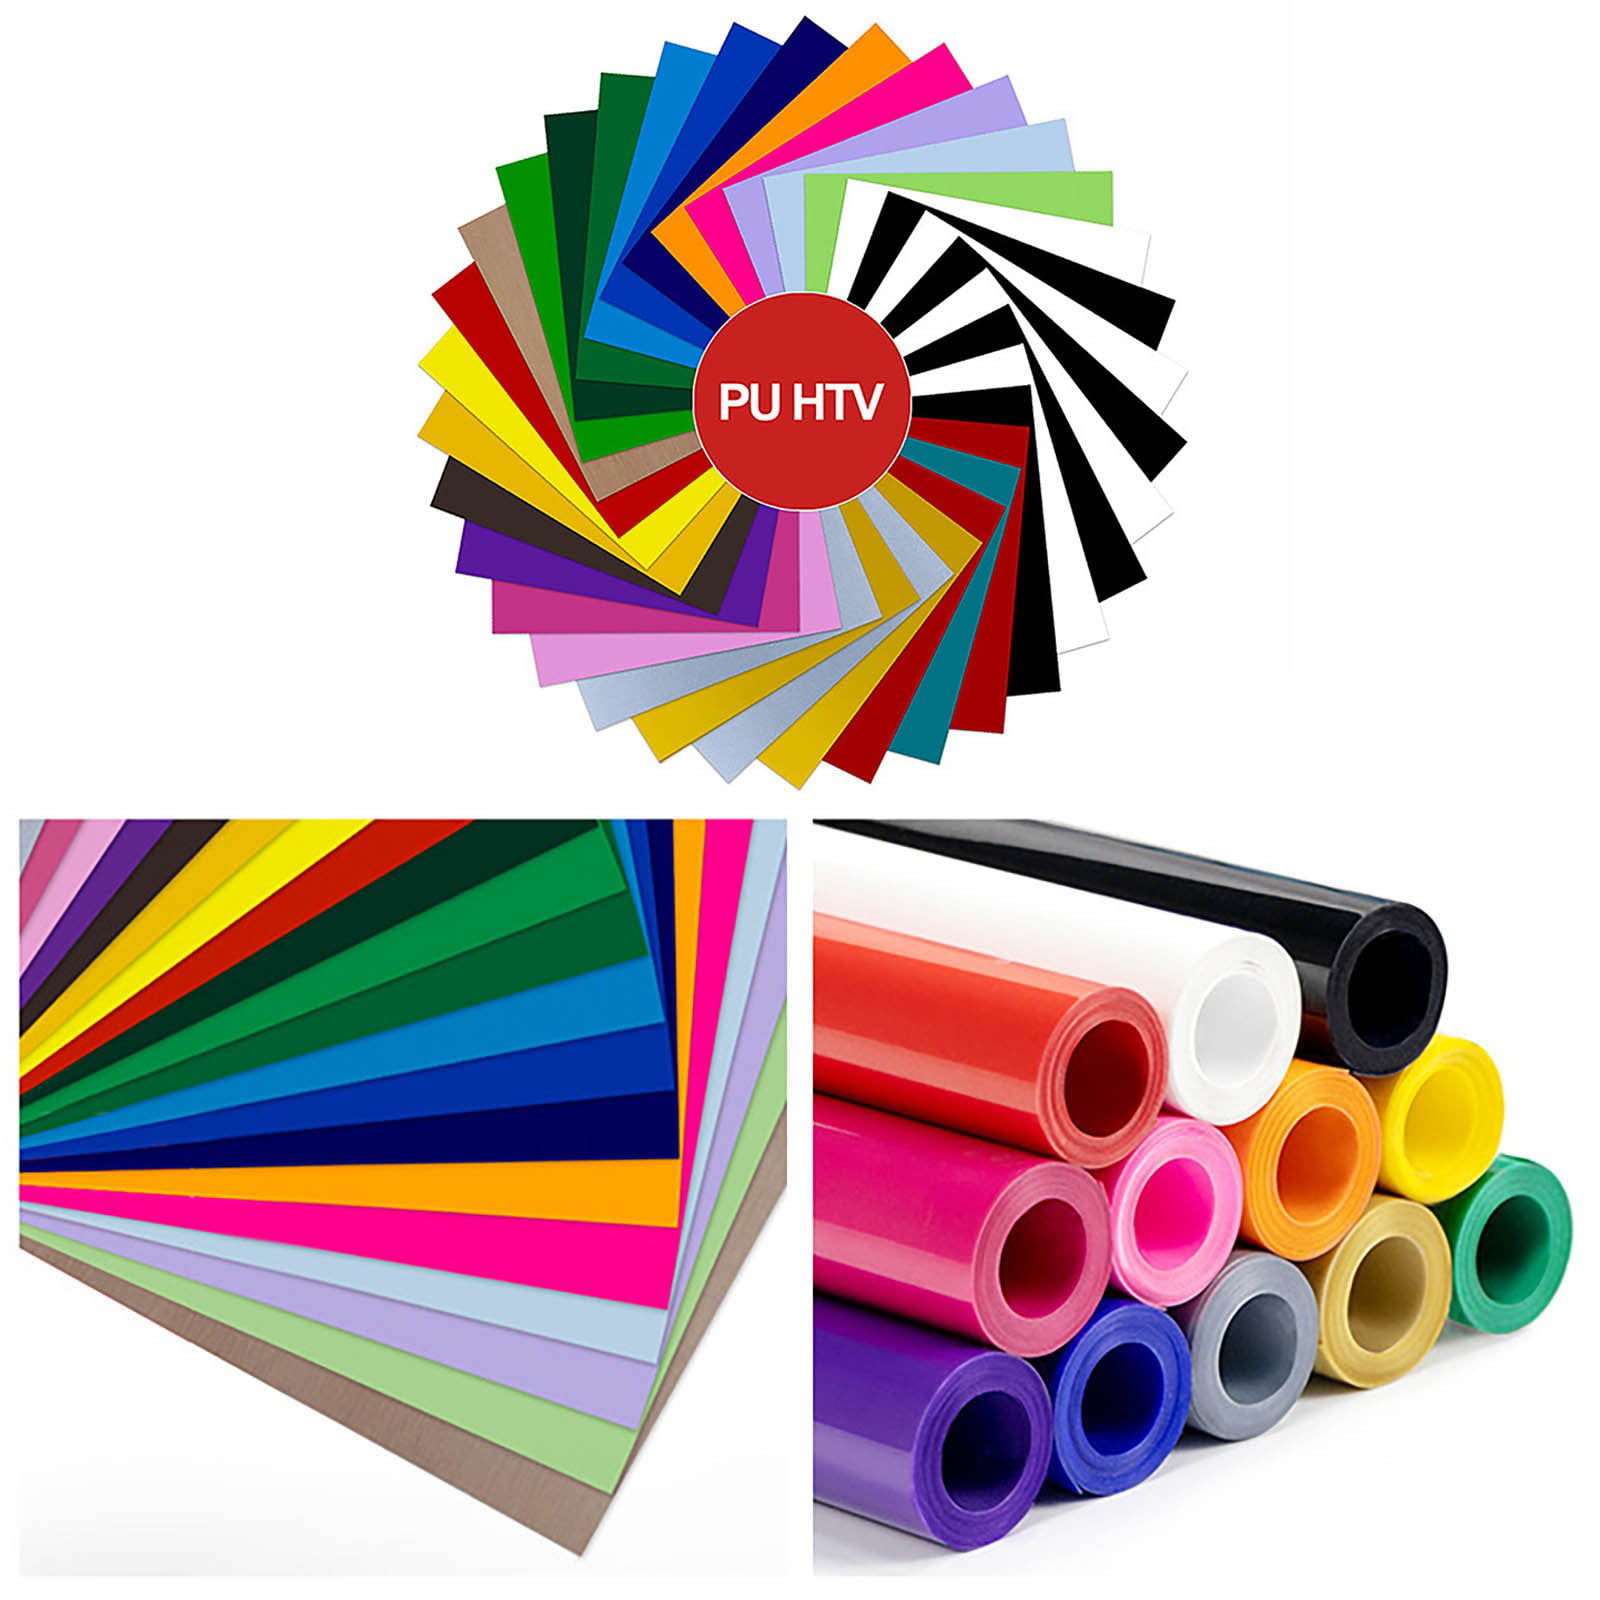 LowProfile Stickers Vinyl Heat Transfer 3D 14 Sheets 12x 10 Puff HTV Heat  Transfer Vinyl 12 Assorted Color Foaming On Vinyl For T Shirts Puffy HTV  Compatible Sticker Decorations 